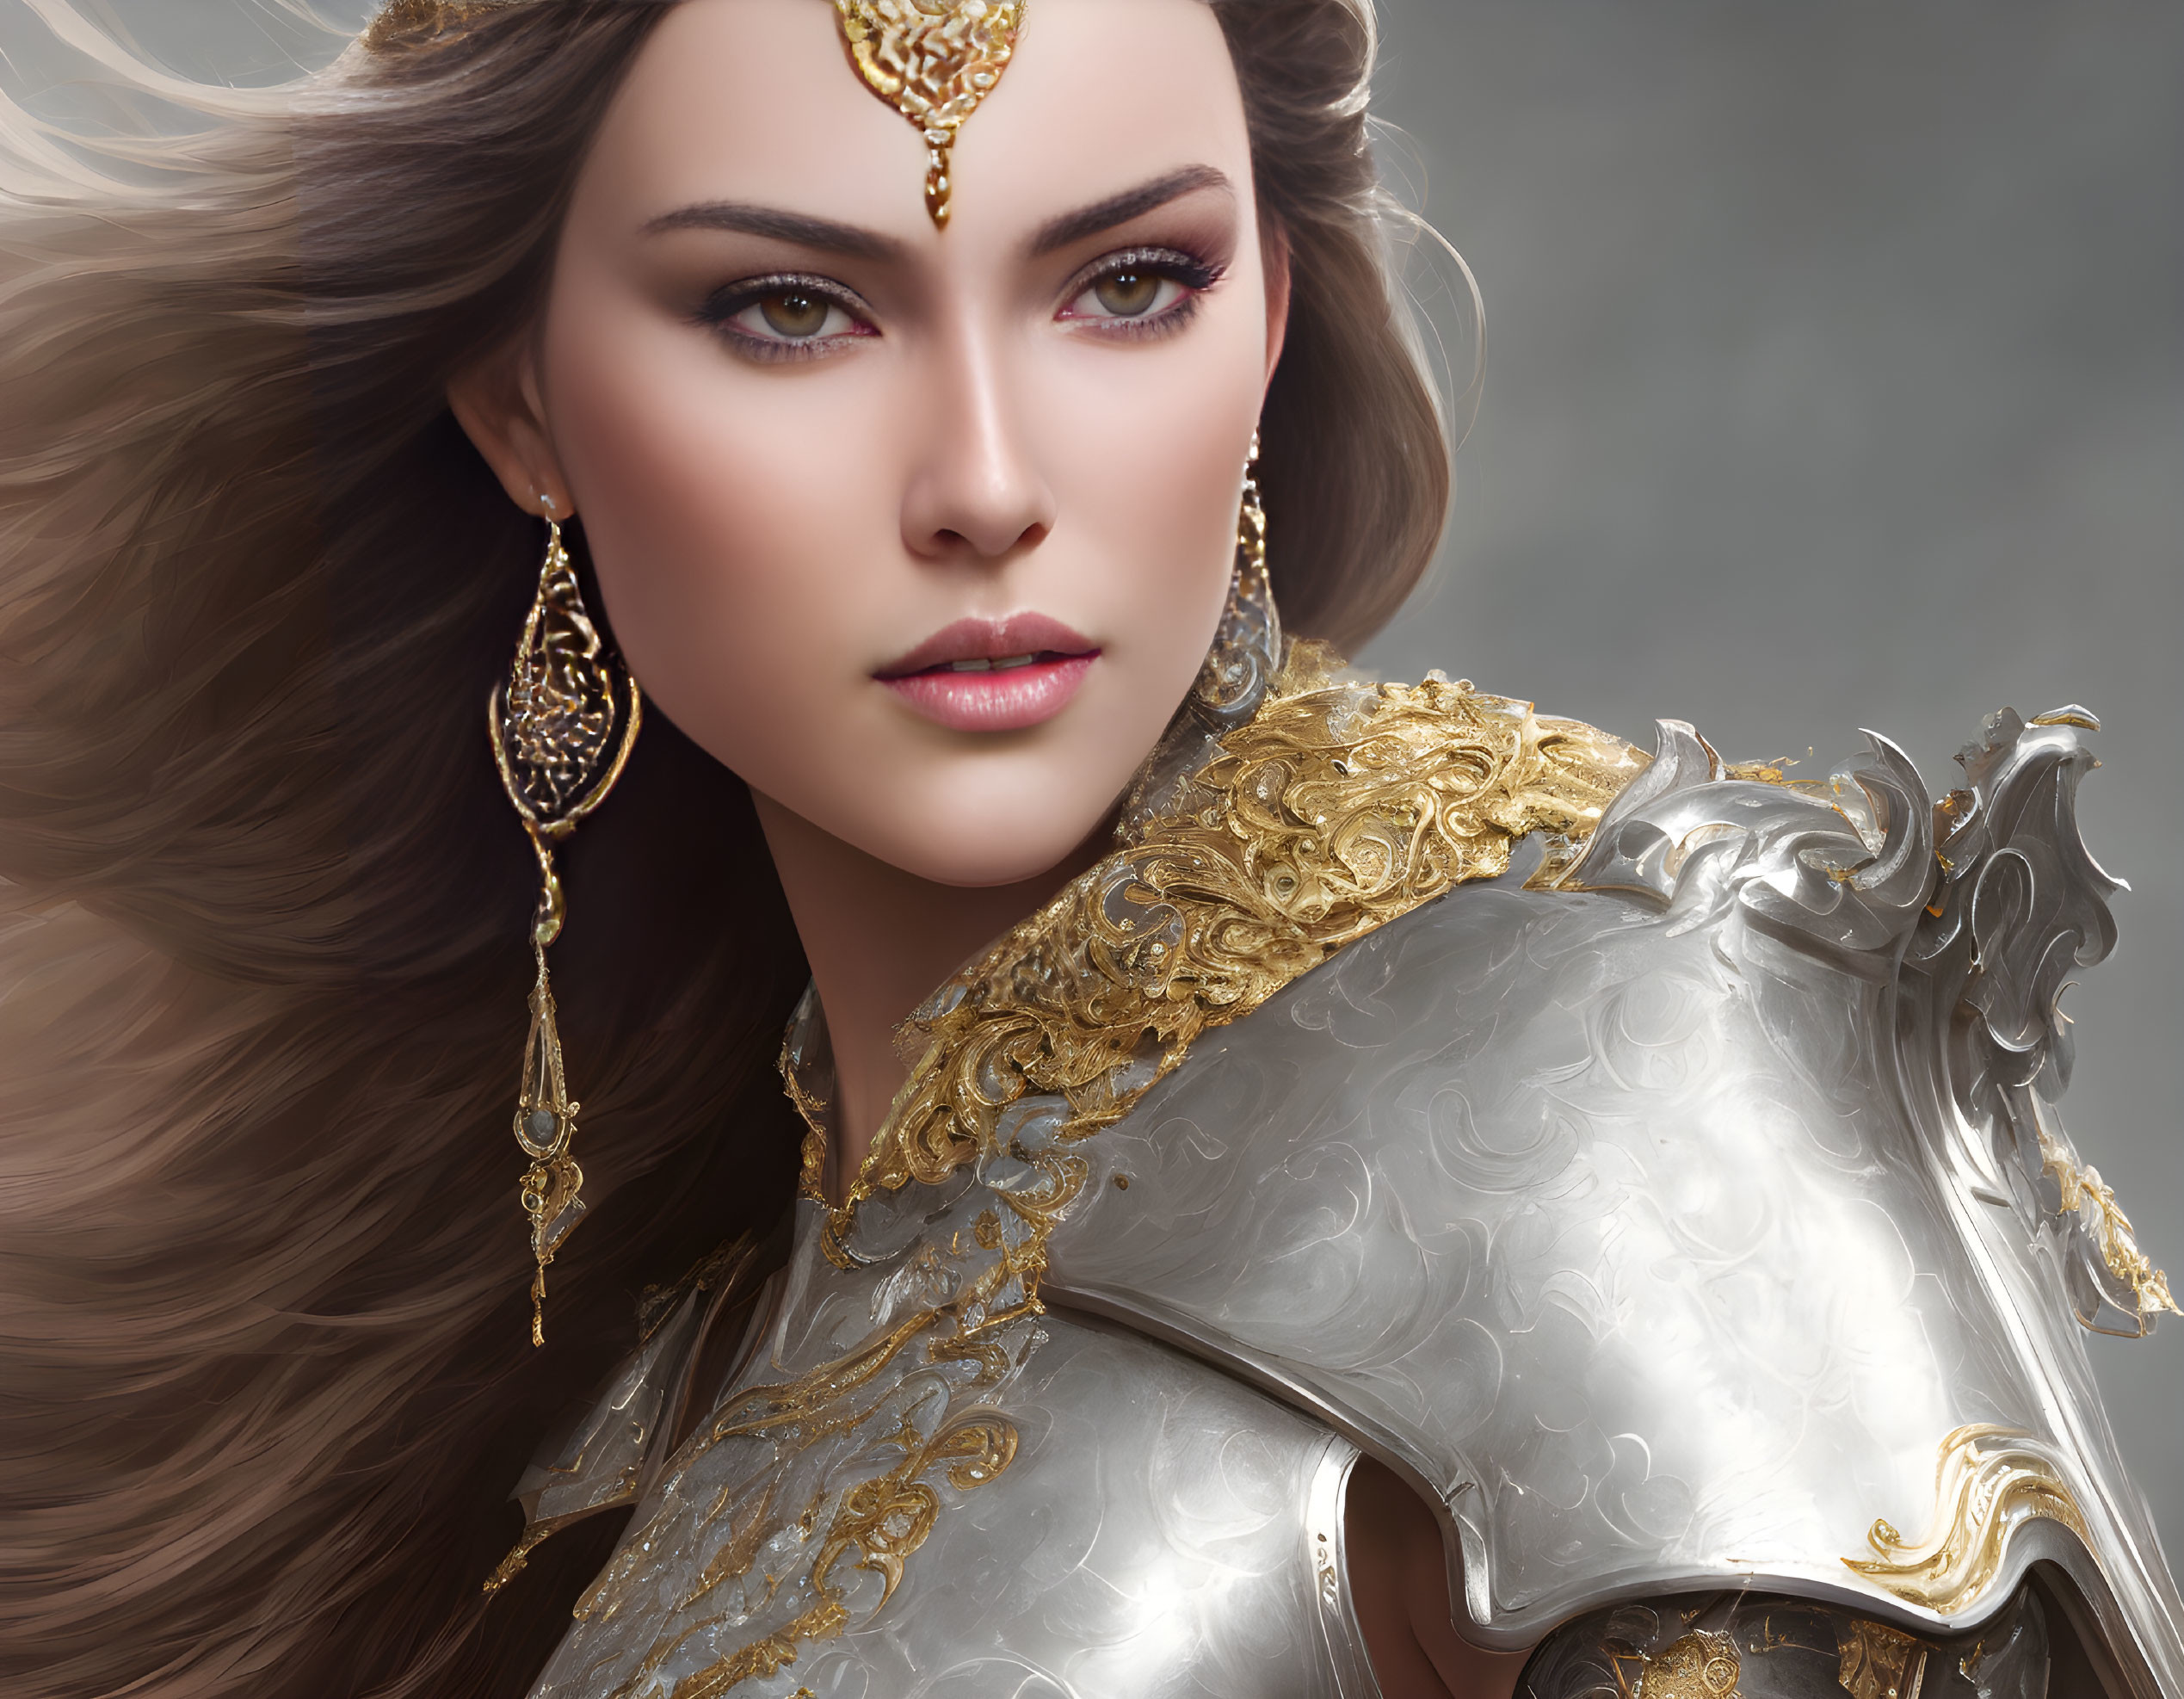 Digital artwork of a regal woman in ornate armor and gold jewelry.